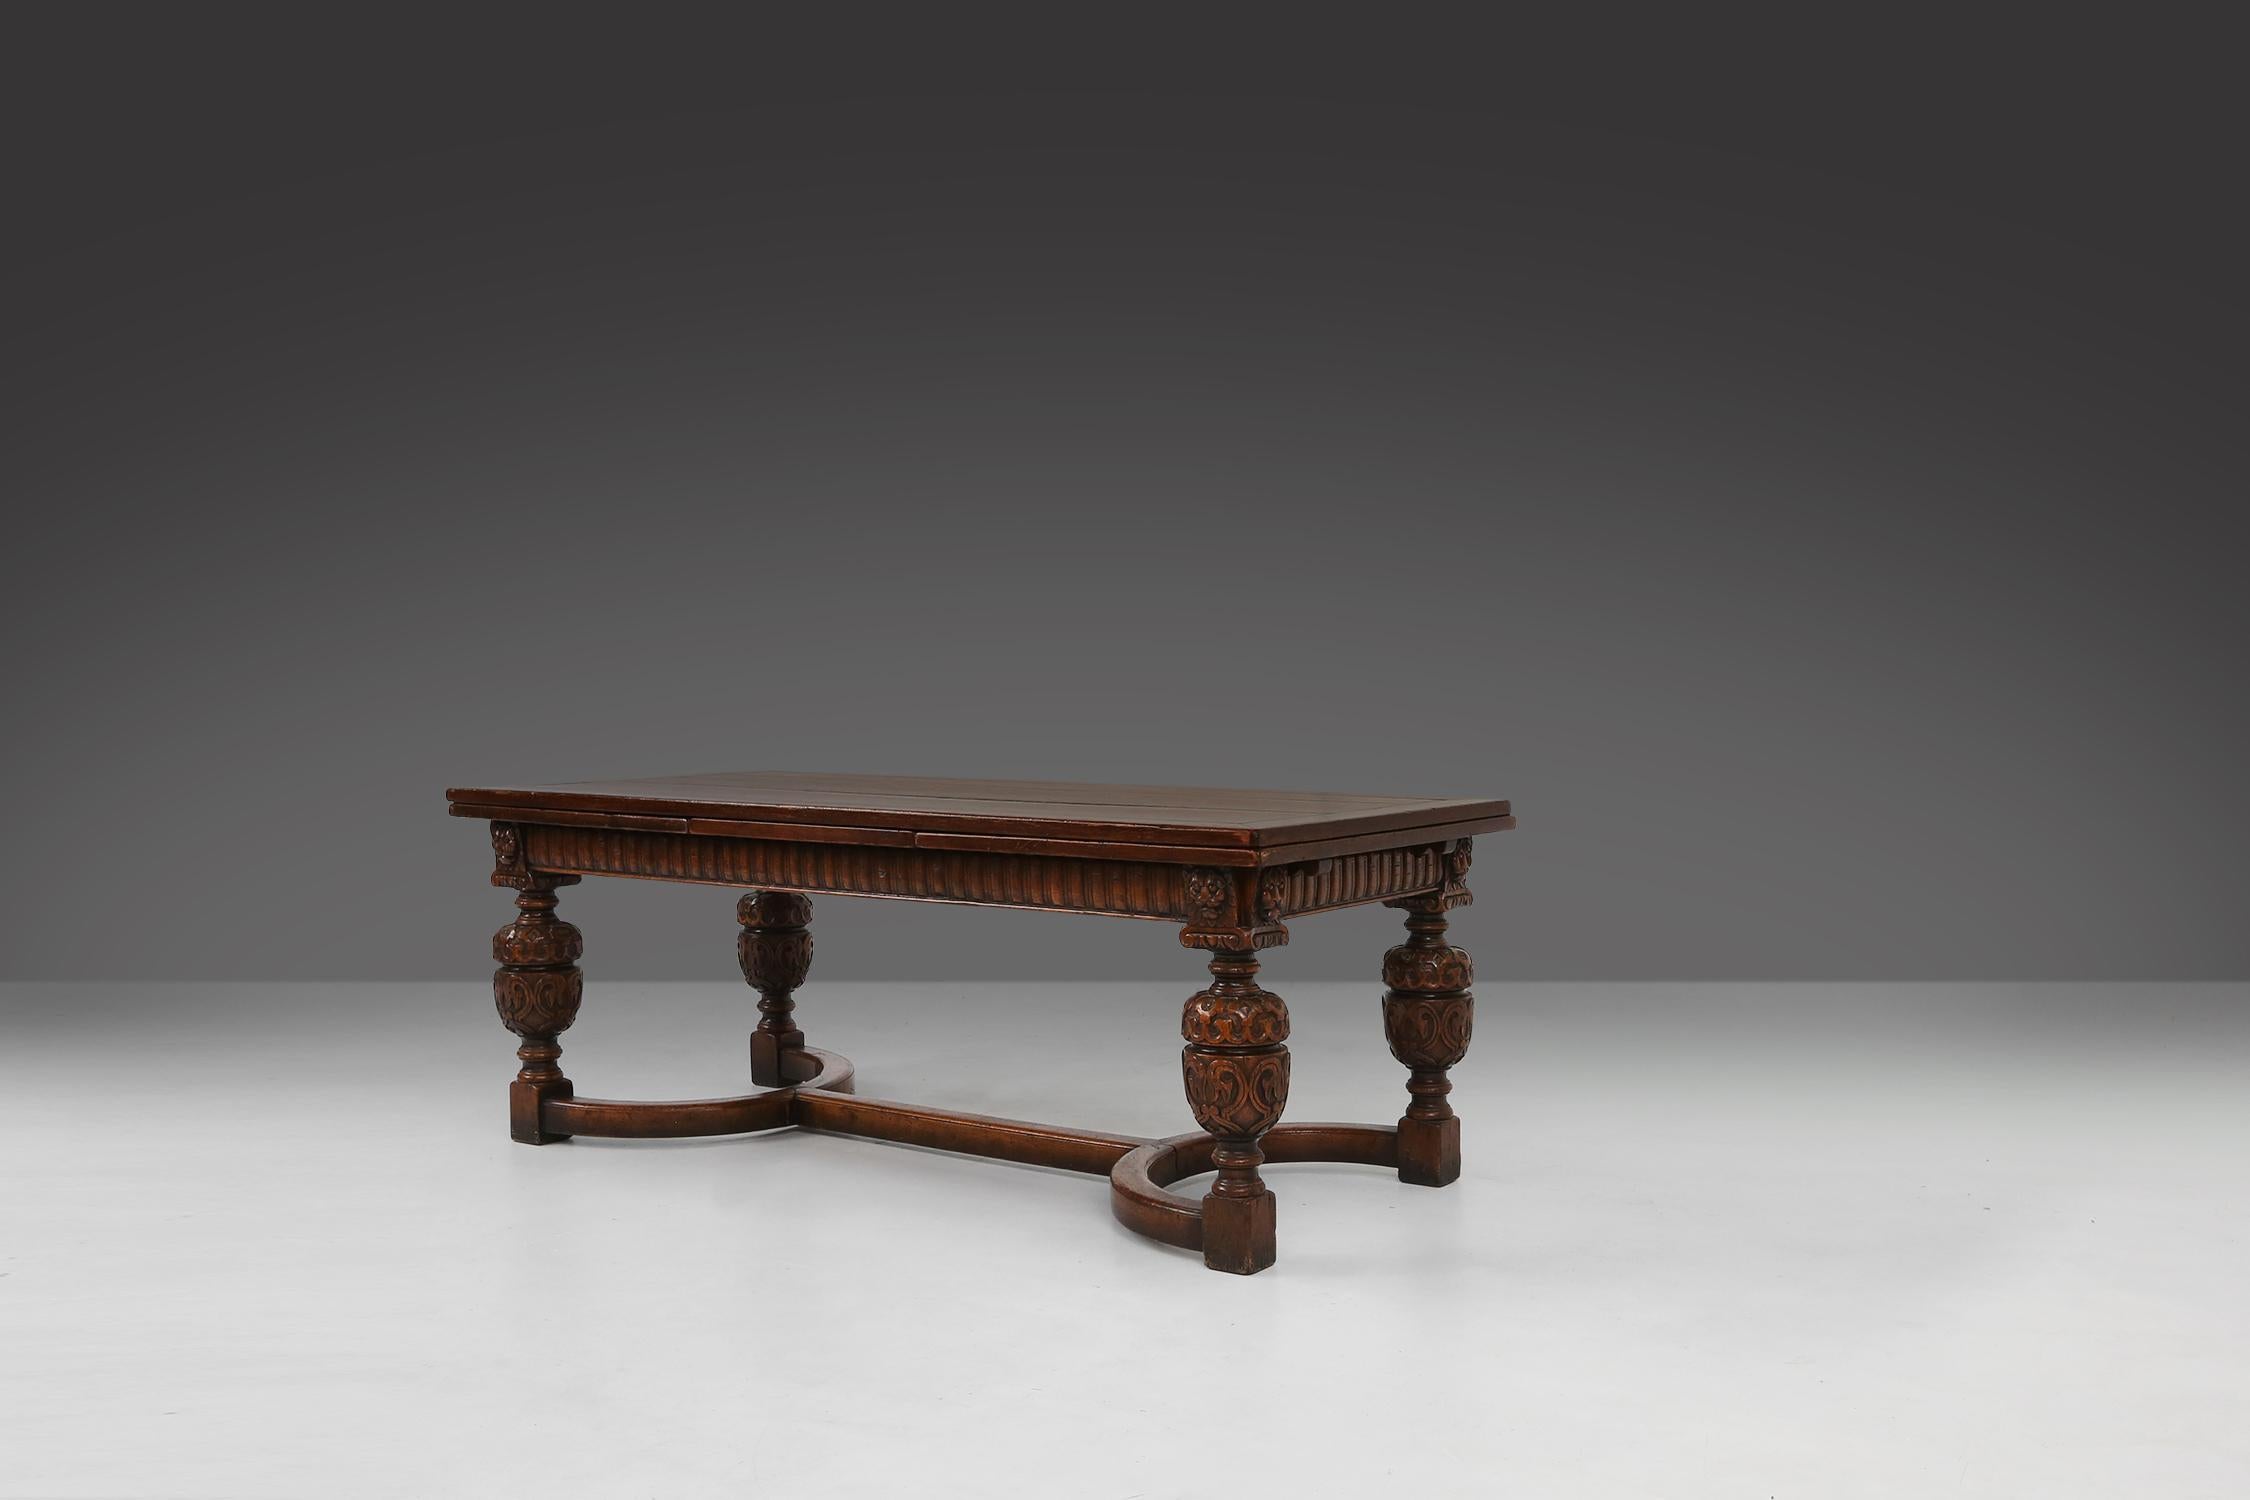 Belgian Flemish late 18th century dining table